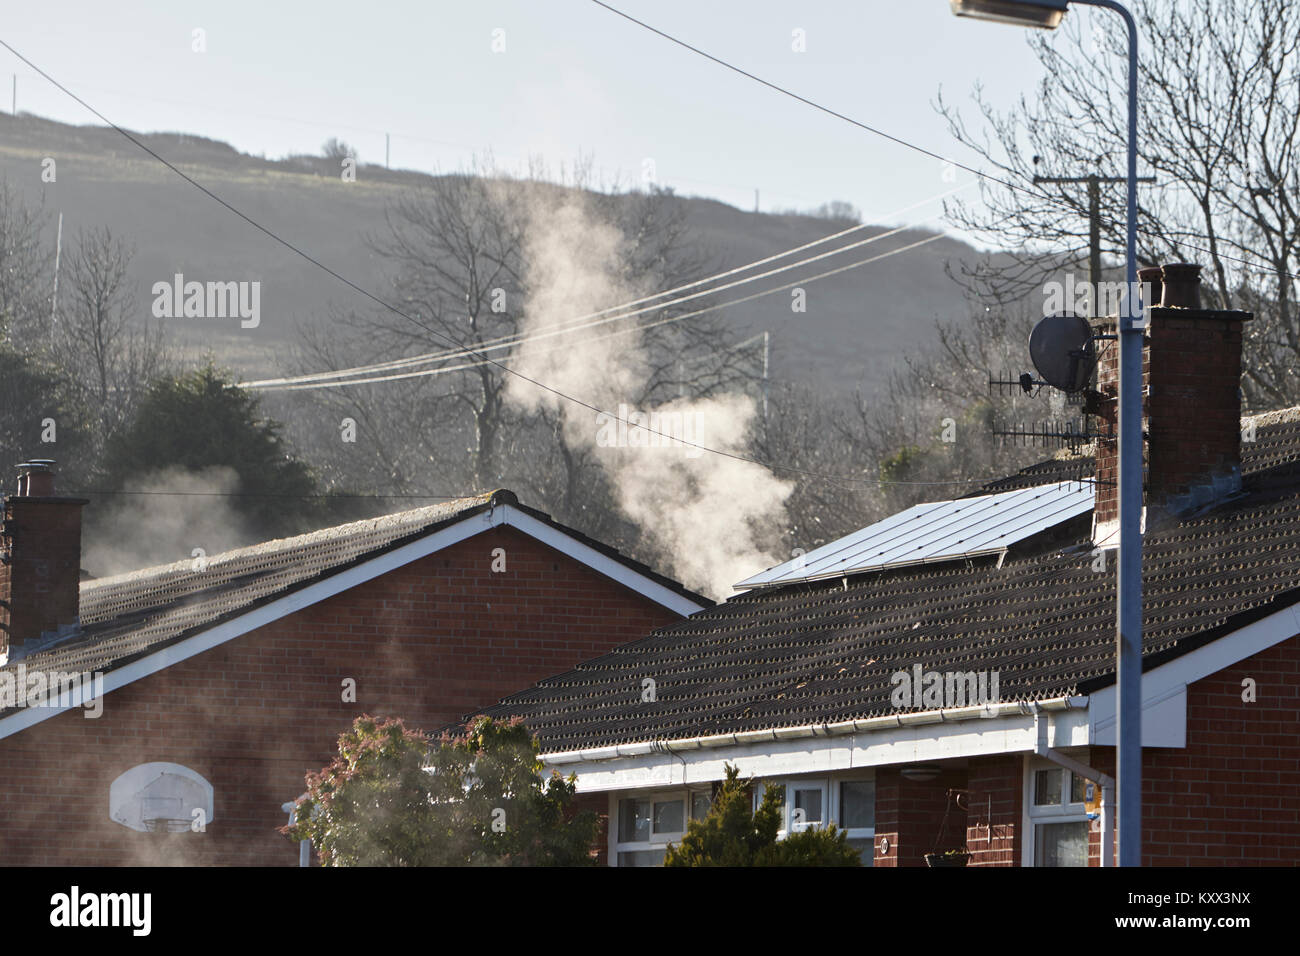 rooves drying and steam rising from heating system and solar panels on roof foggy day in the uk Stock Photo